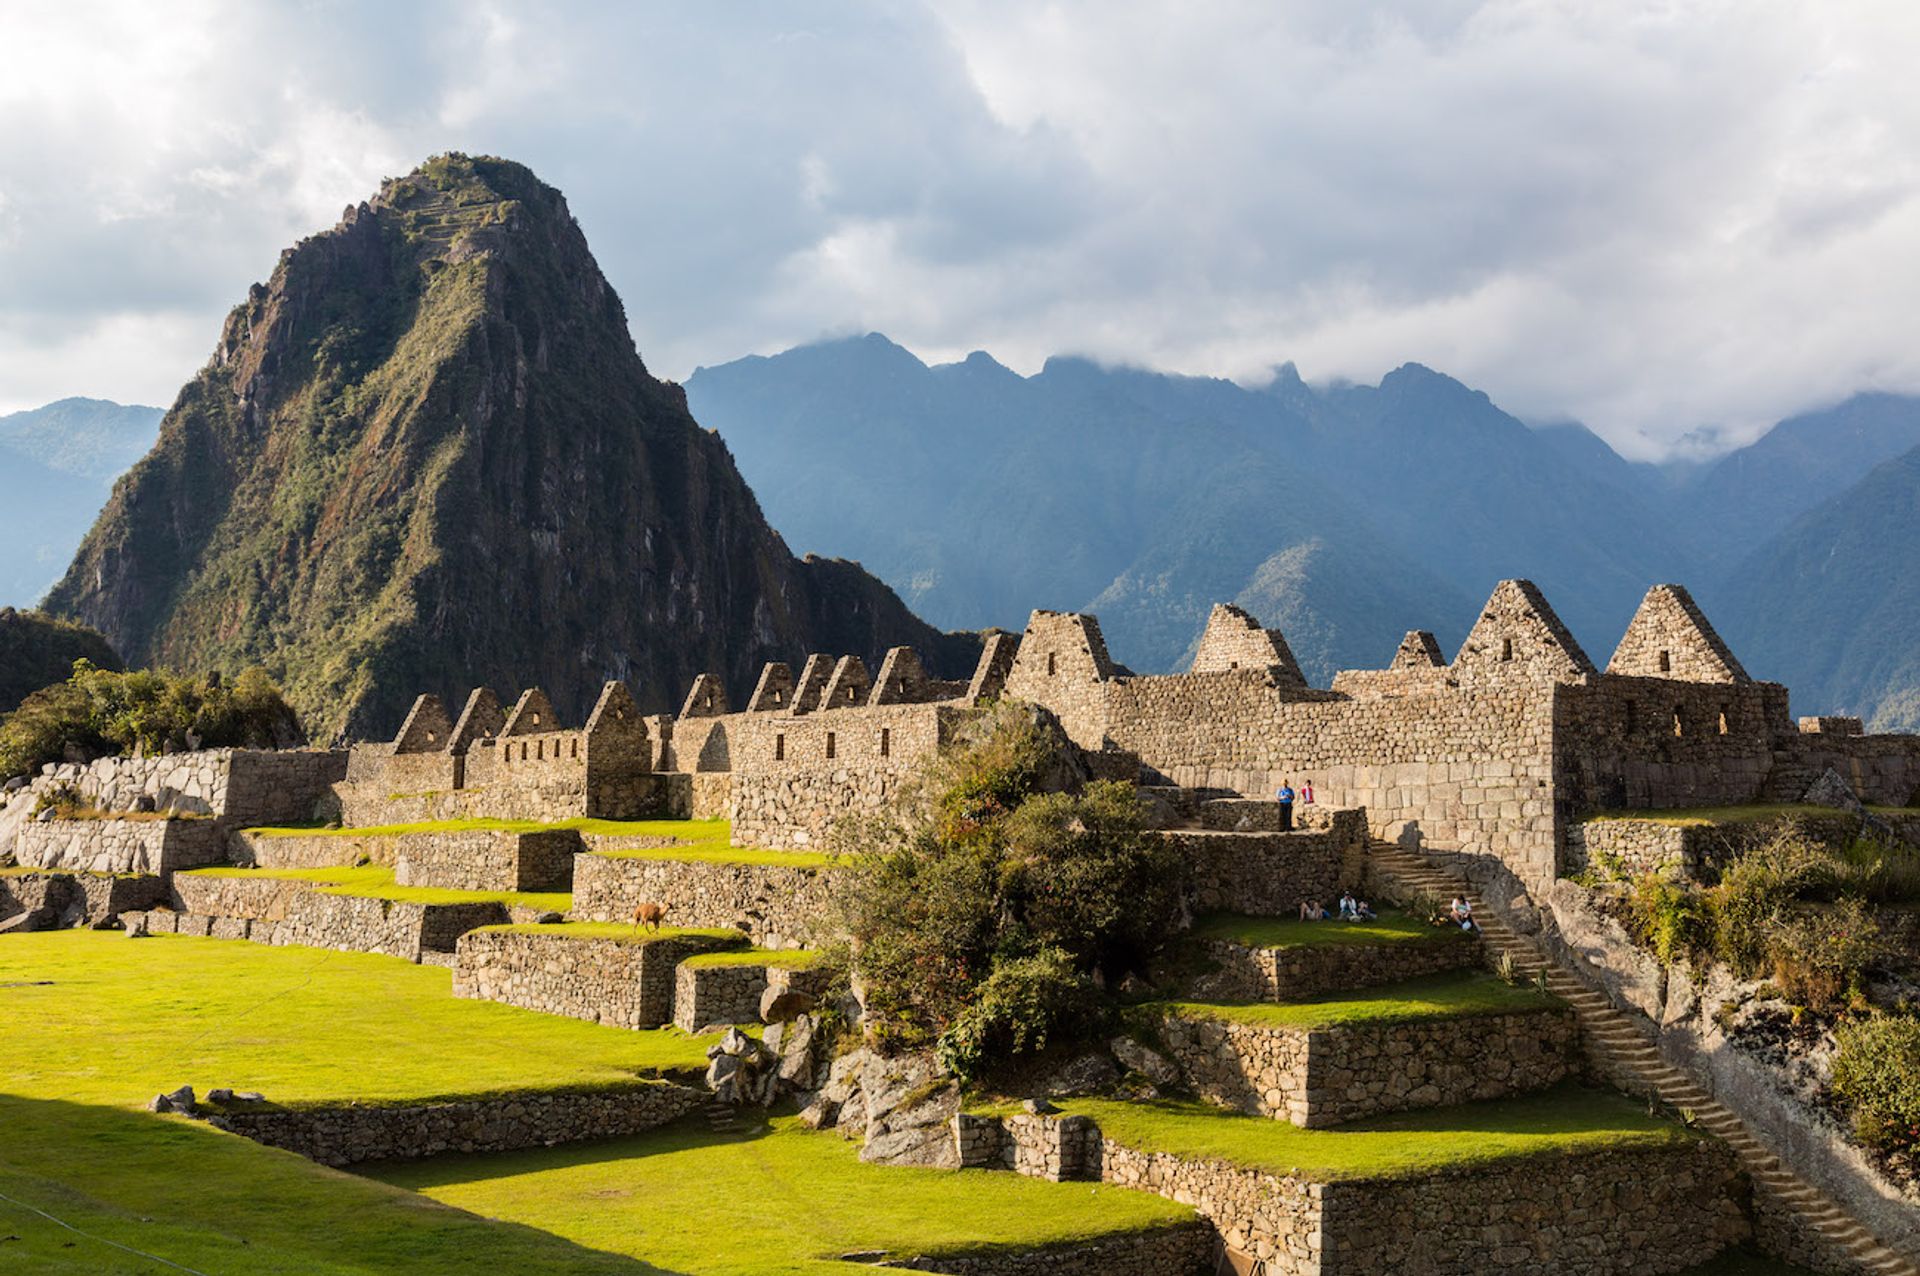 View of the ancient houses in Machu Picchu 